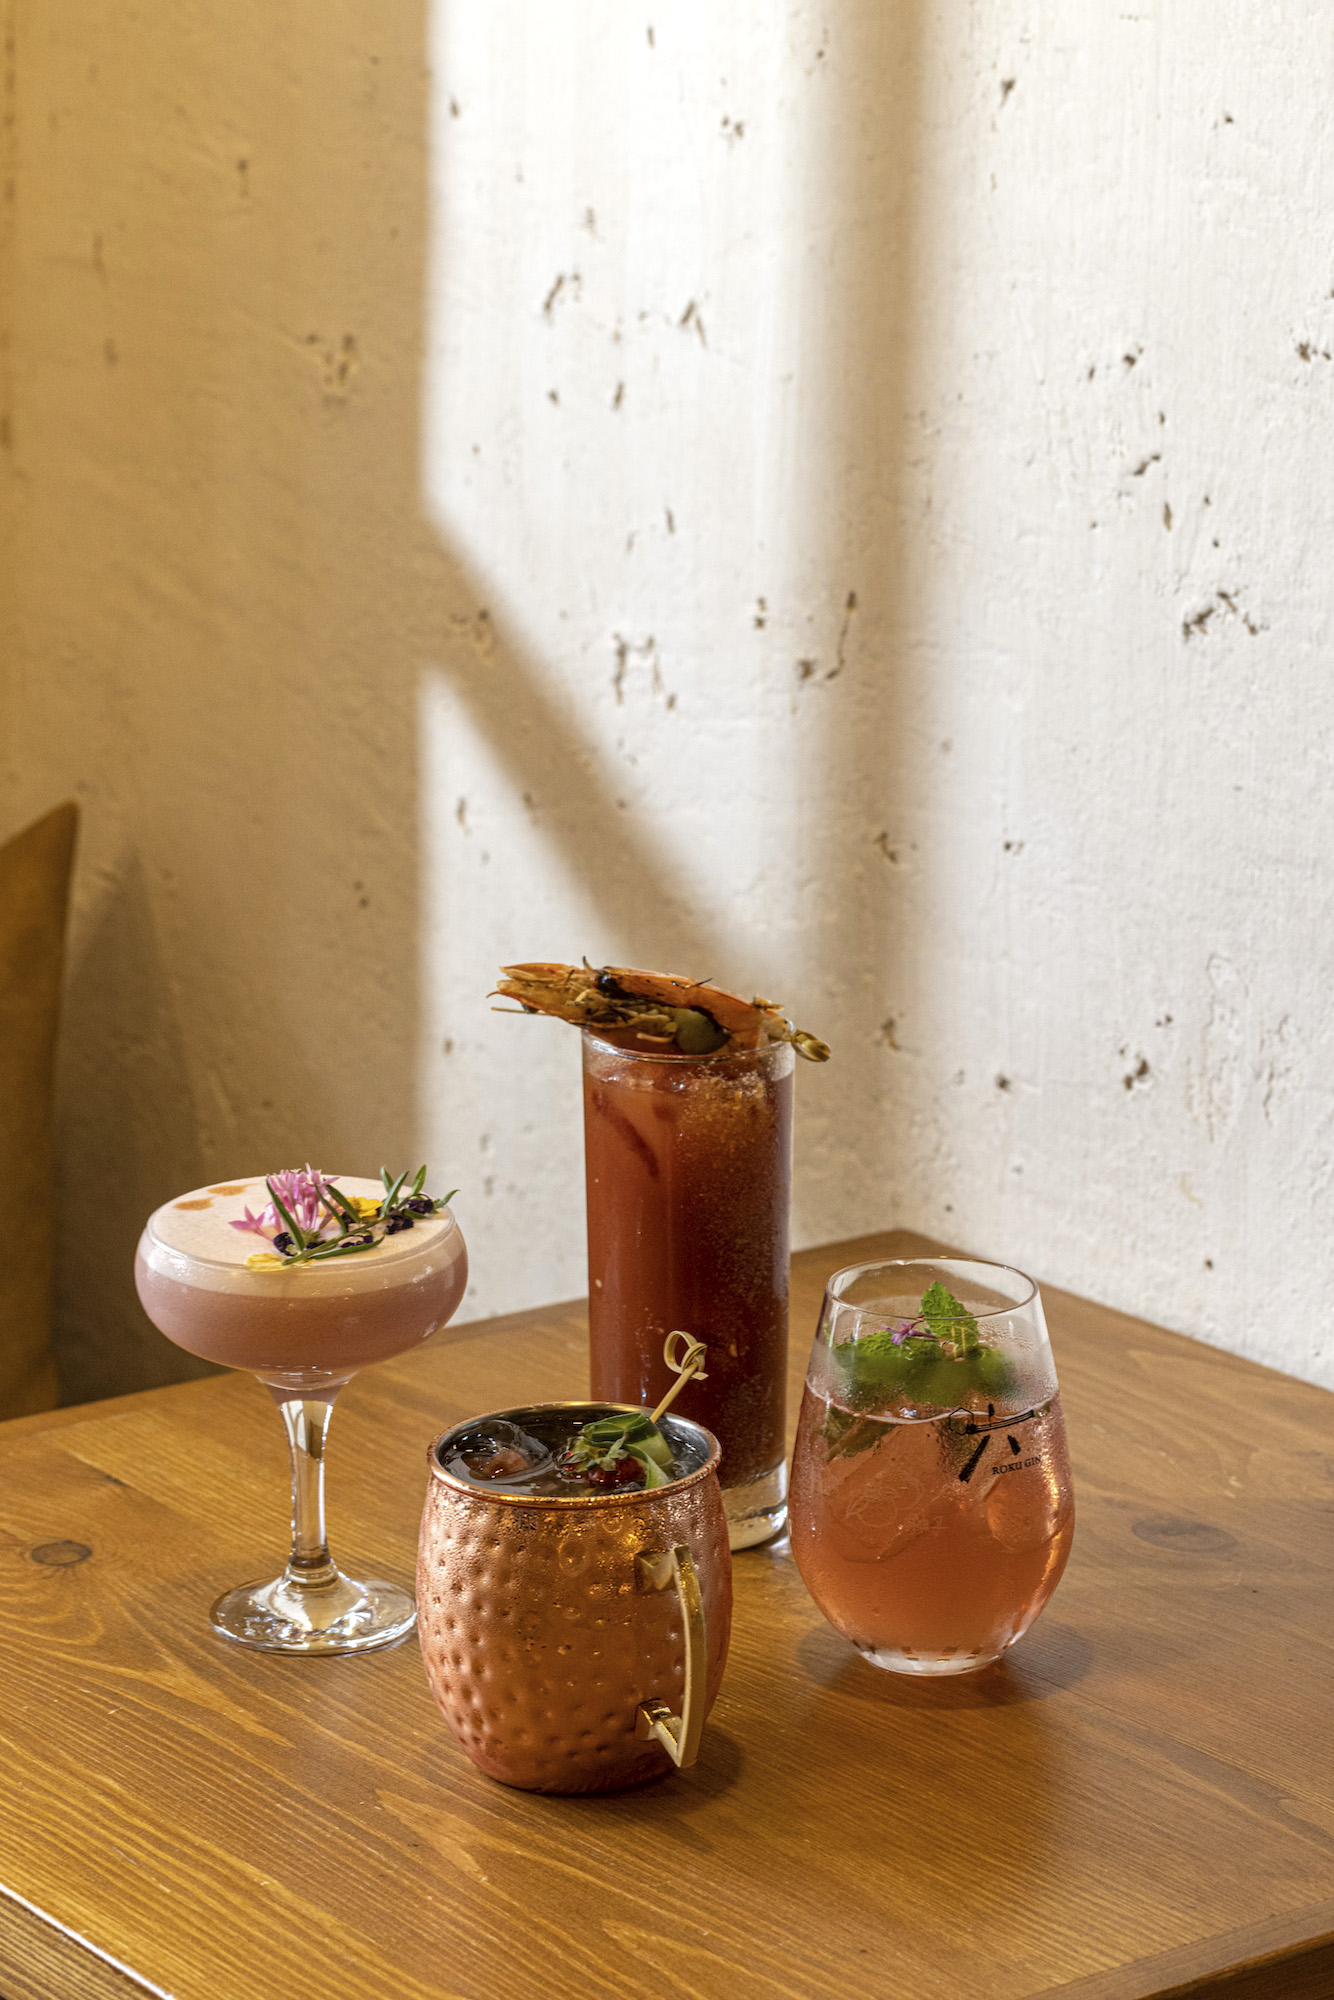 Some of their signature cocktails, which includes Sakura (gin, strawberry, hibiscus)